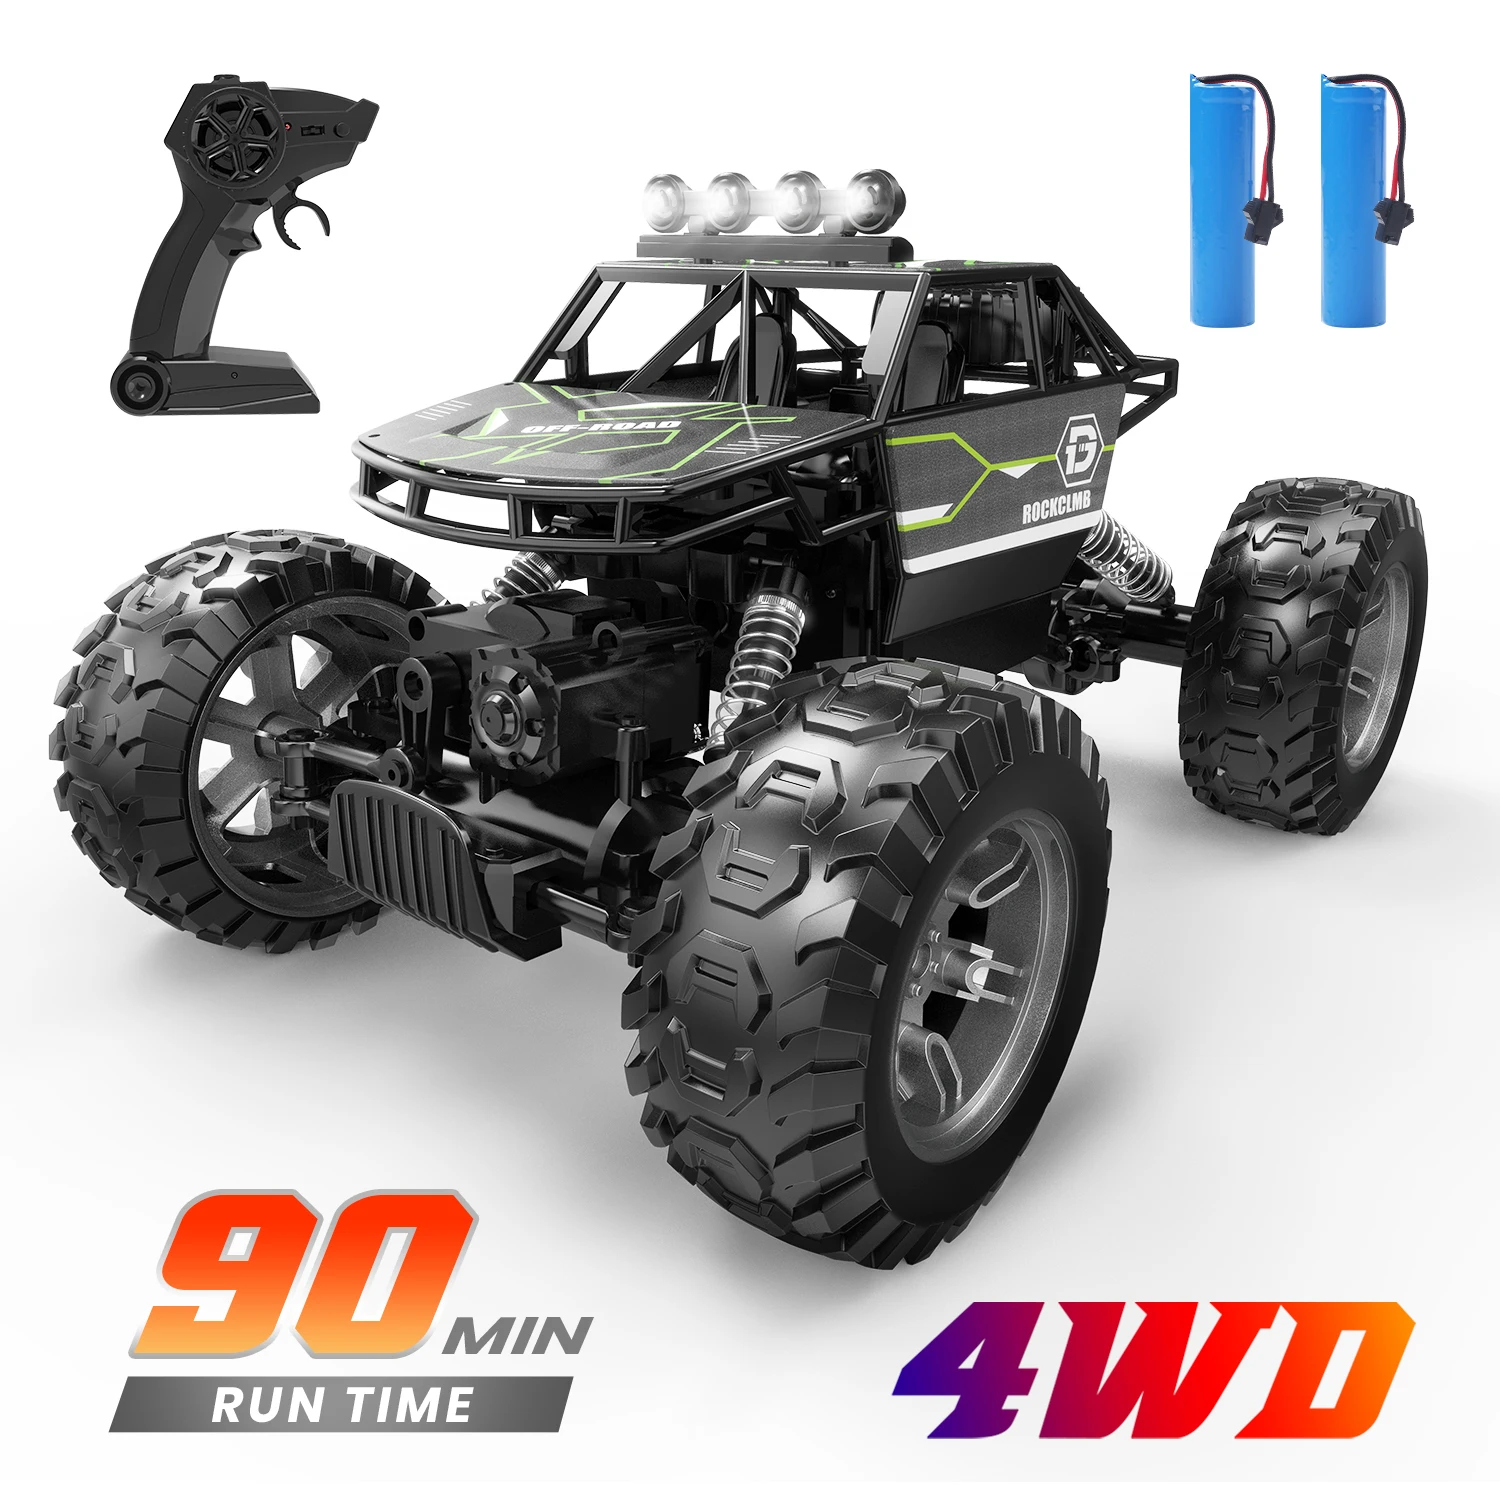 

Holyton RC Cars, 4WD Remote Control Car, 1:16 Scale Off Road Monster Trucks High Speed 2.4GHz All Terrain, 2 Rechargeable Batter